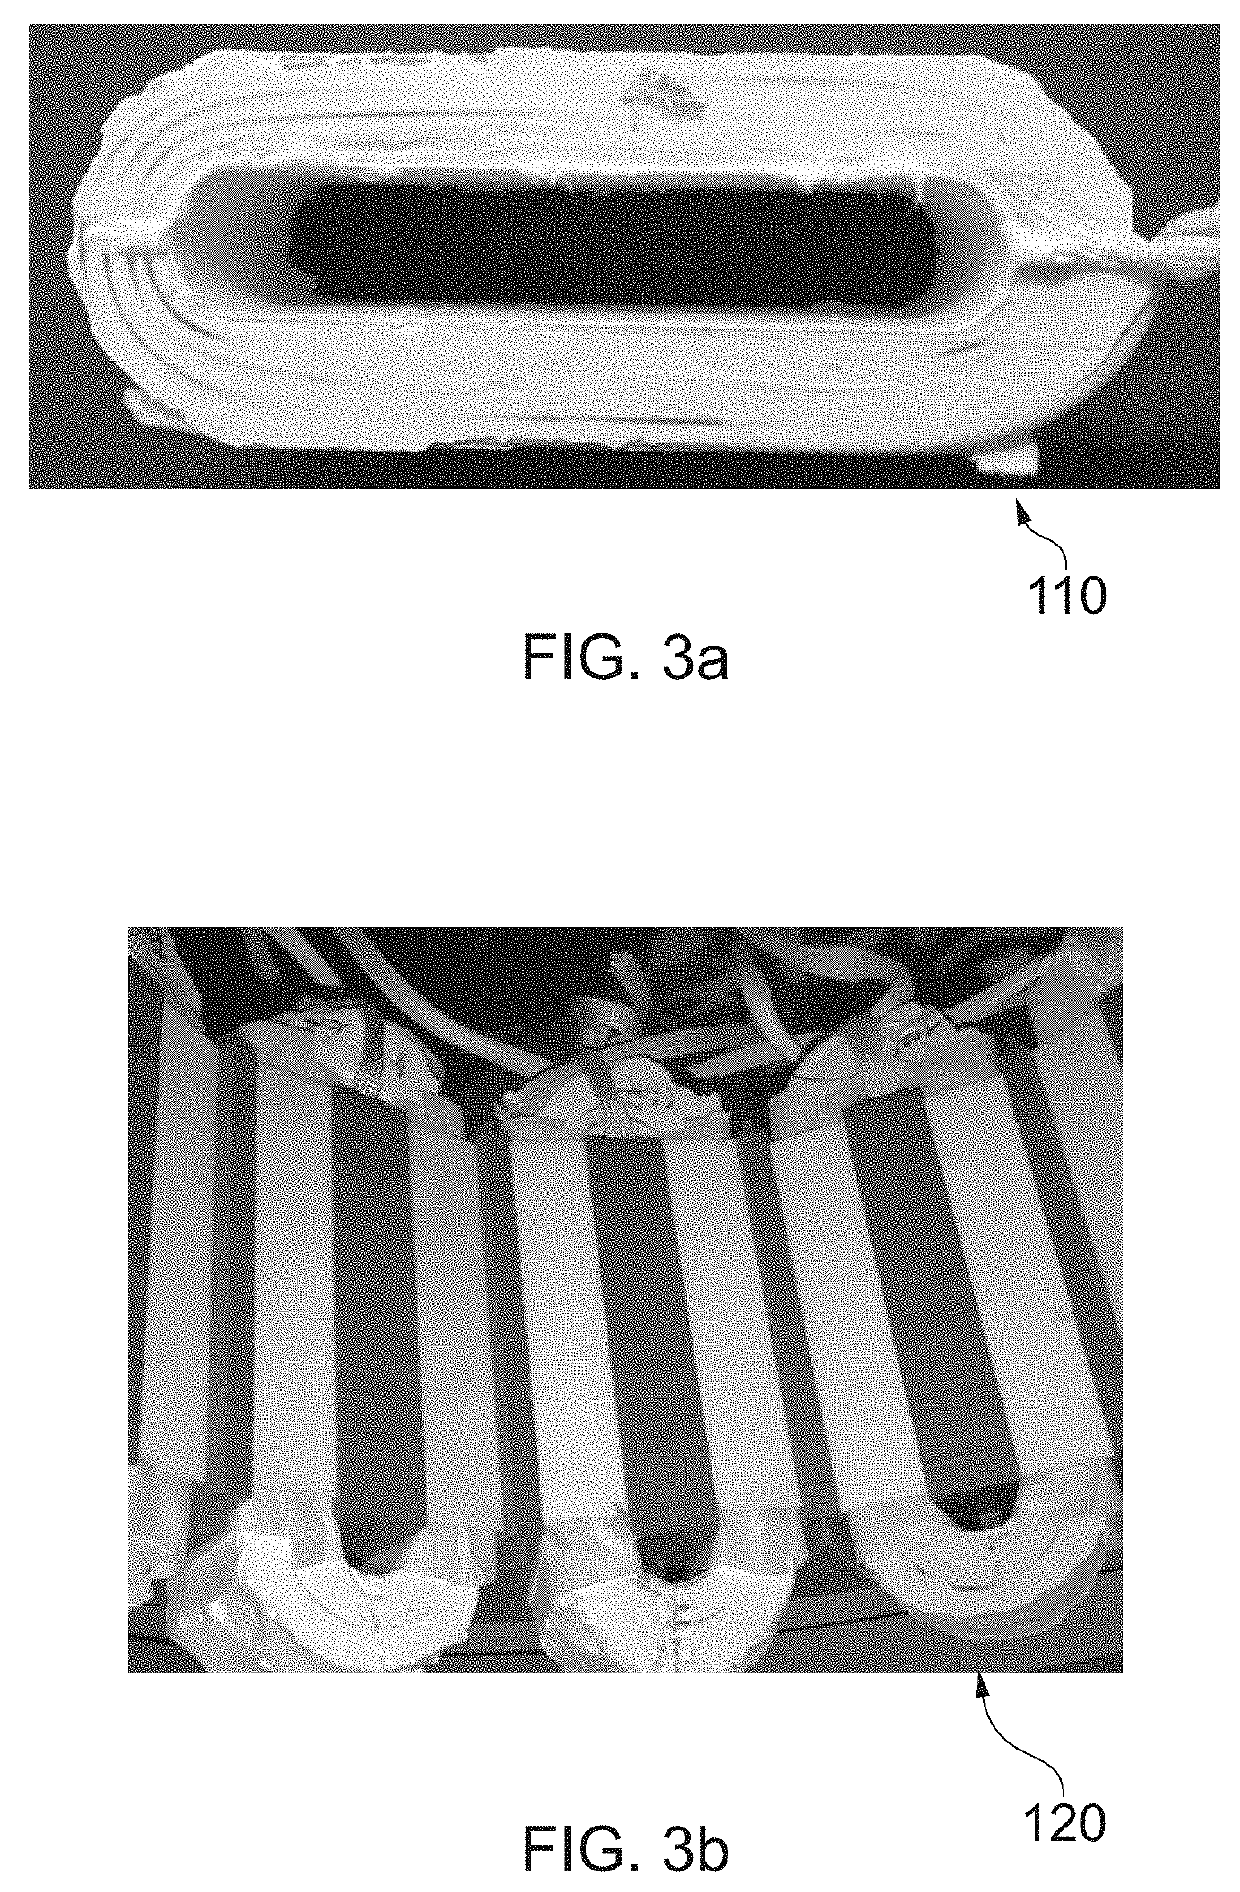 Methods of encapsulating electrical windings in an encapsulant composition